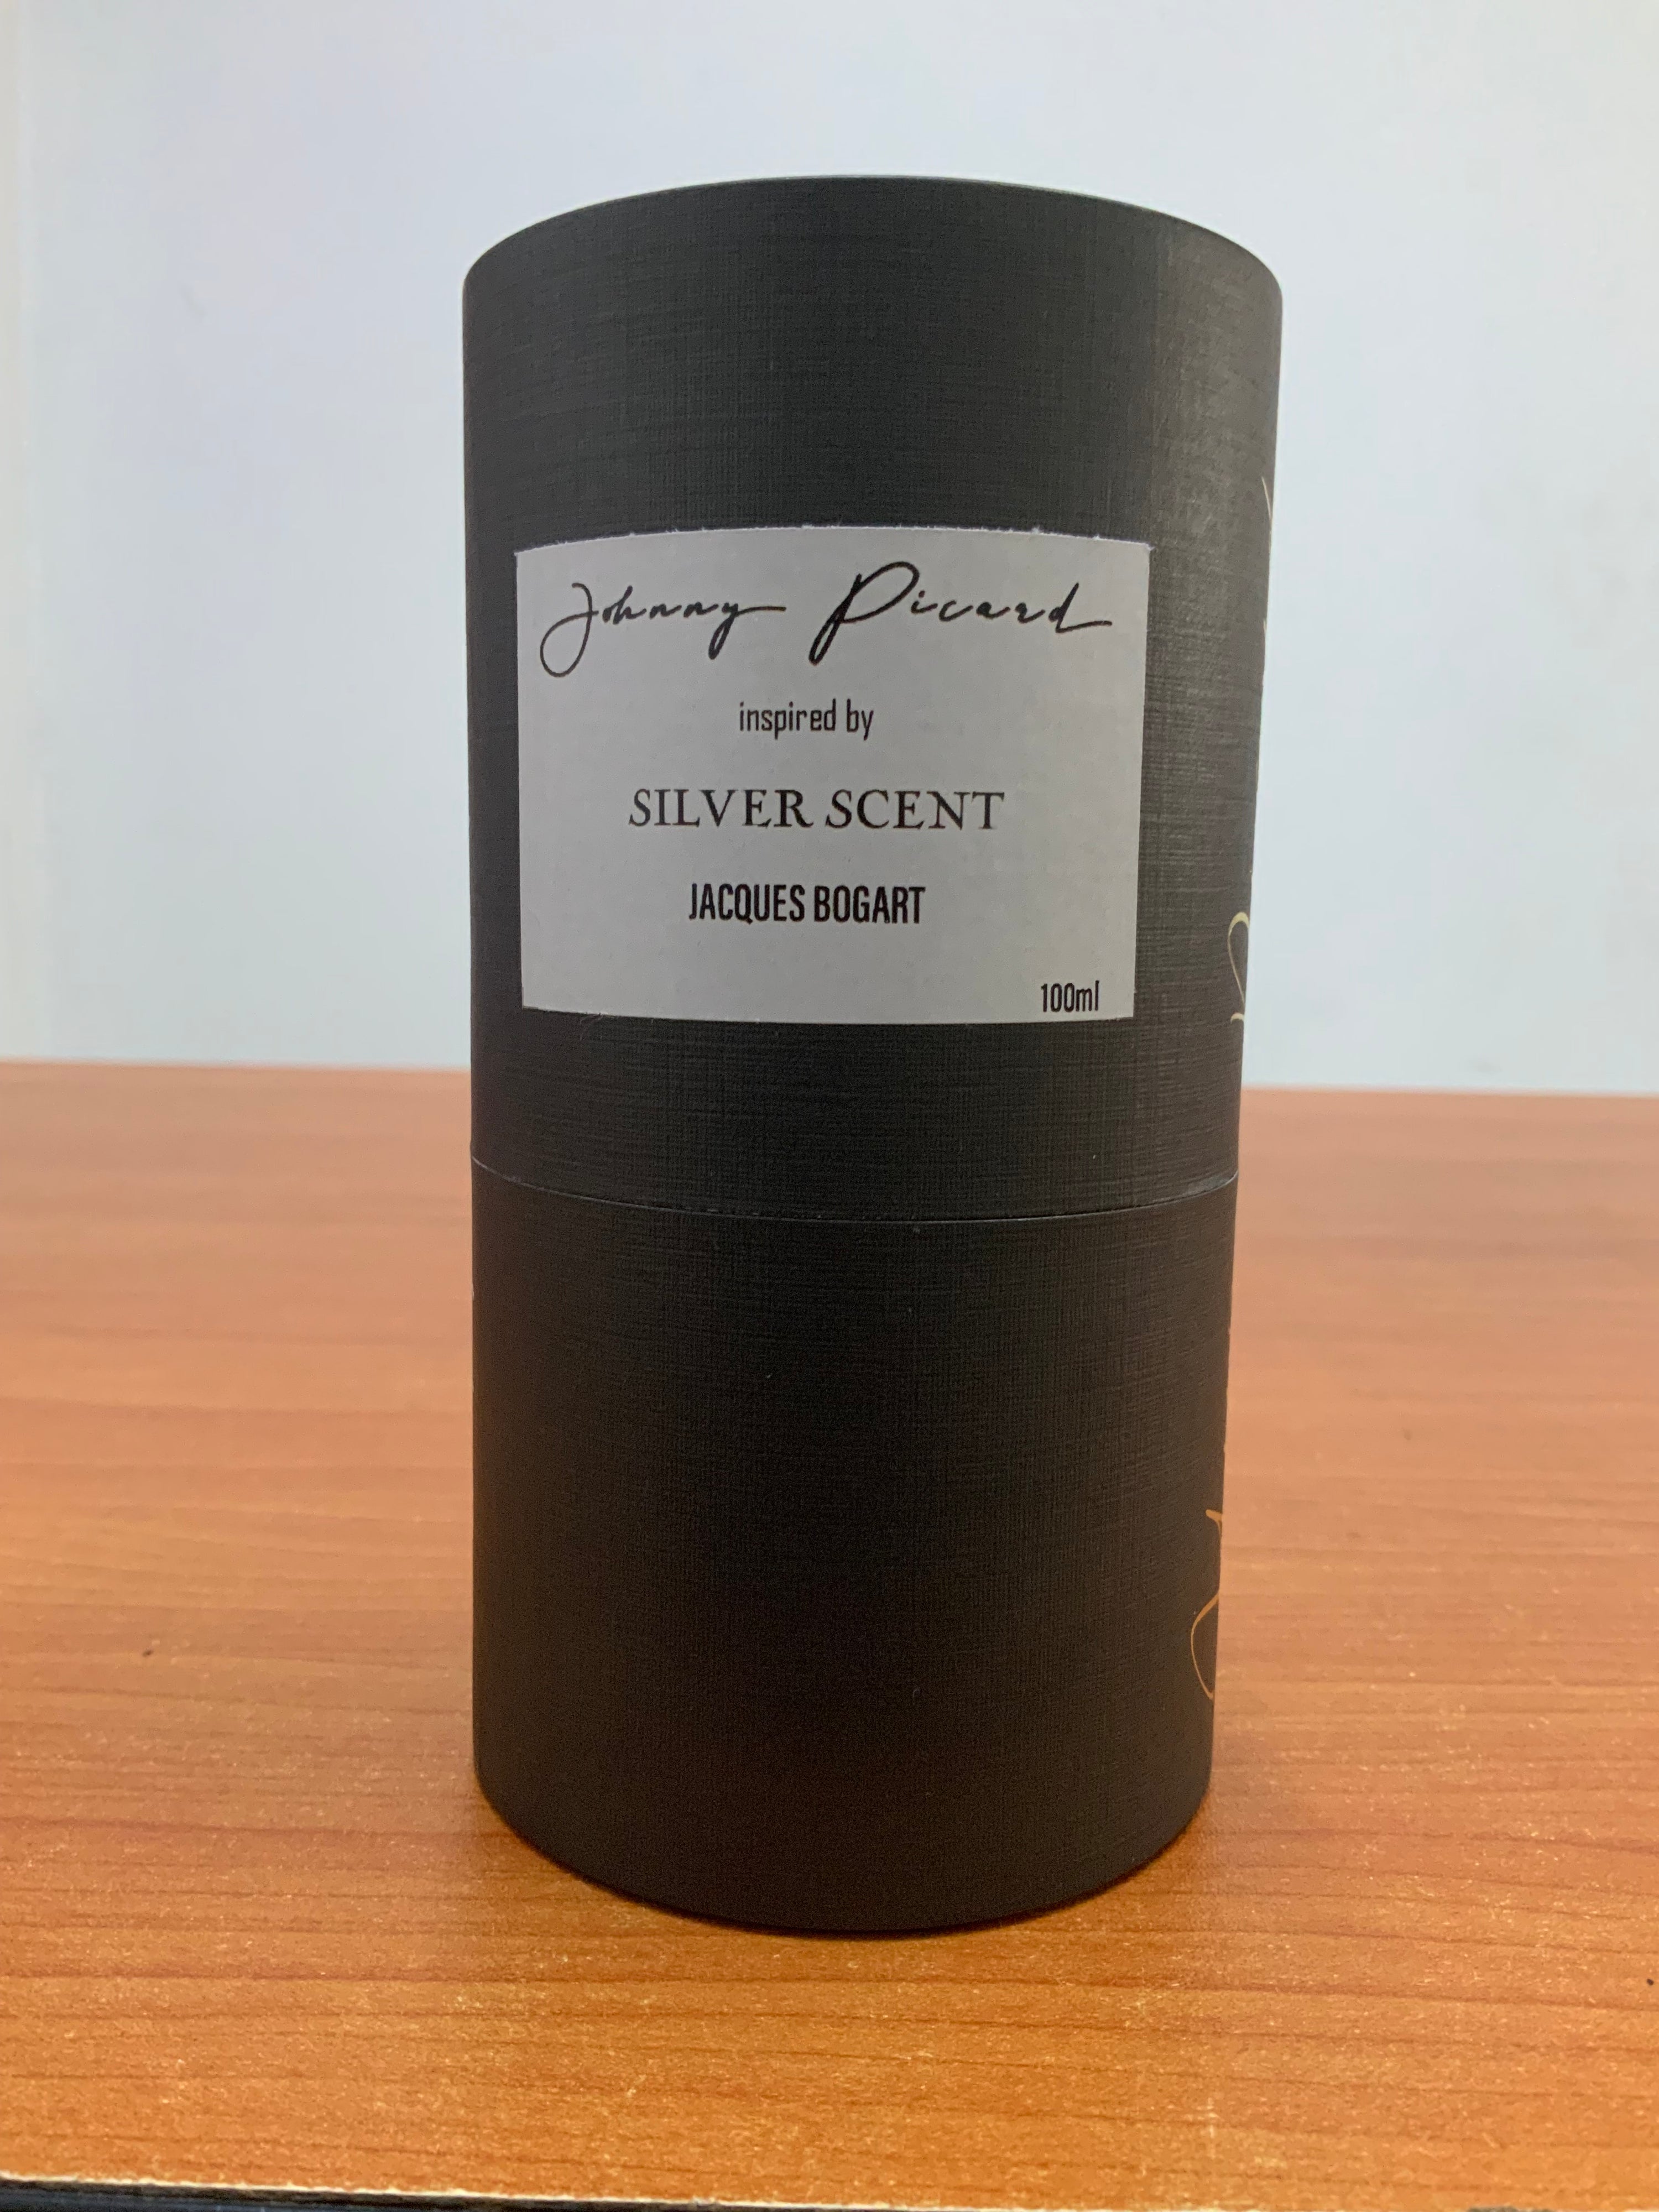 Johnny Picard inspired by Silver Scent   JACQUES BOGART